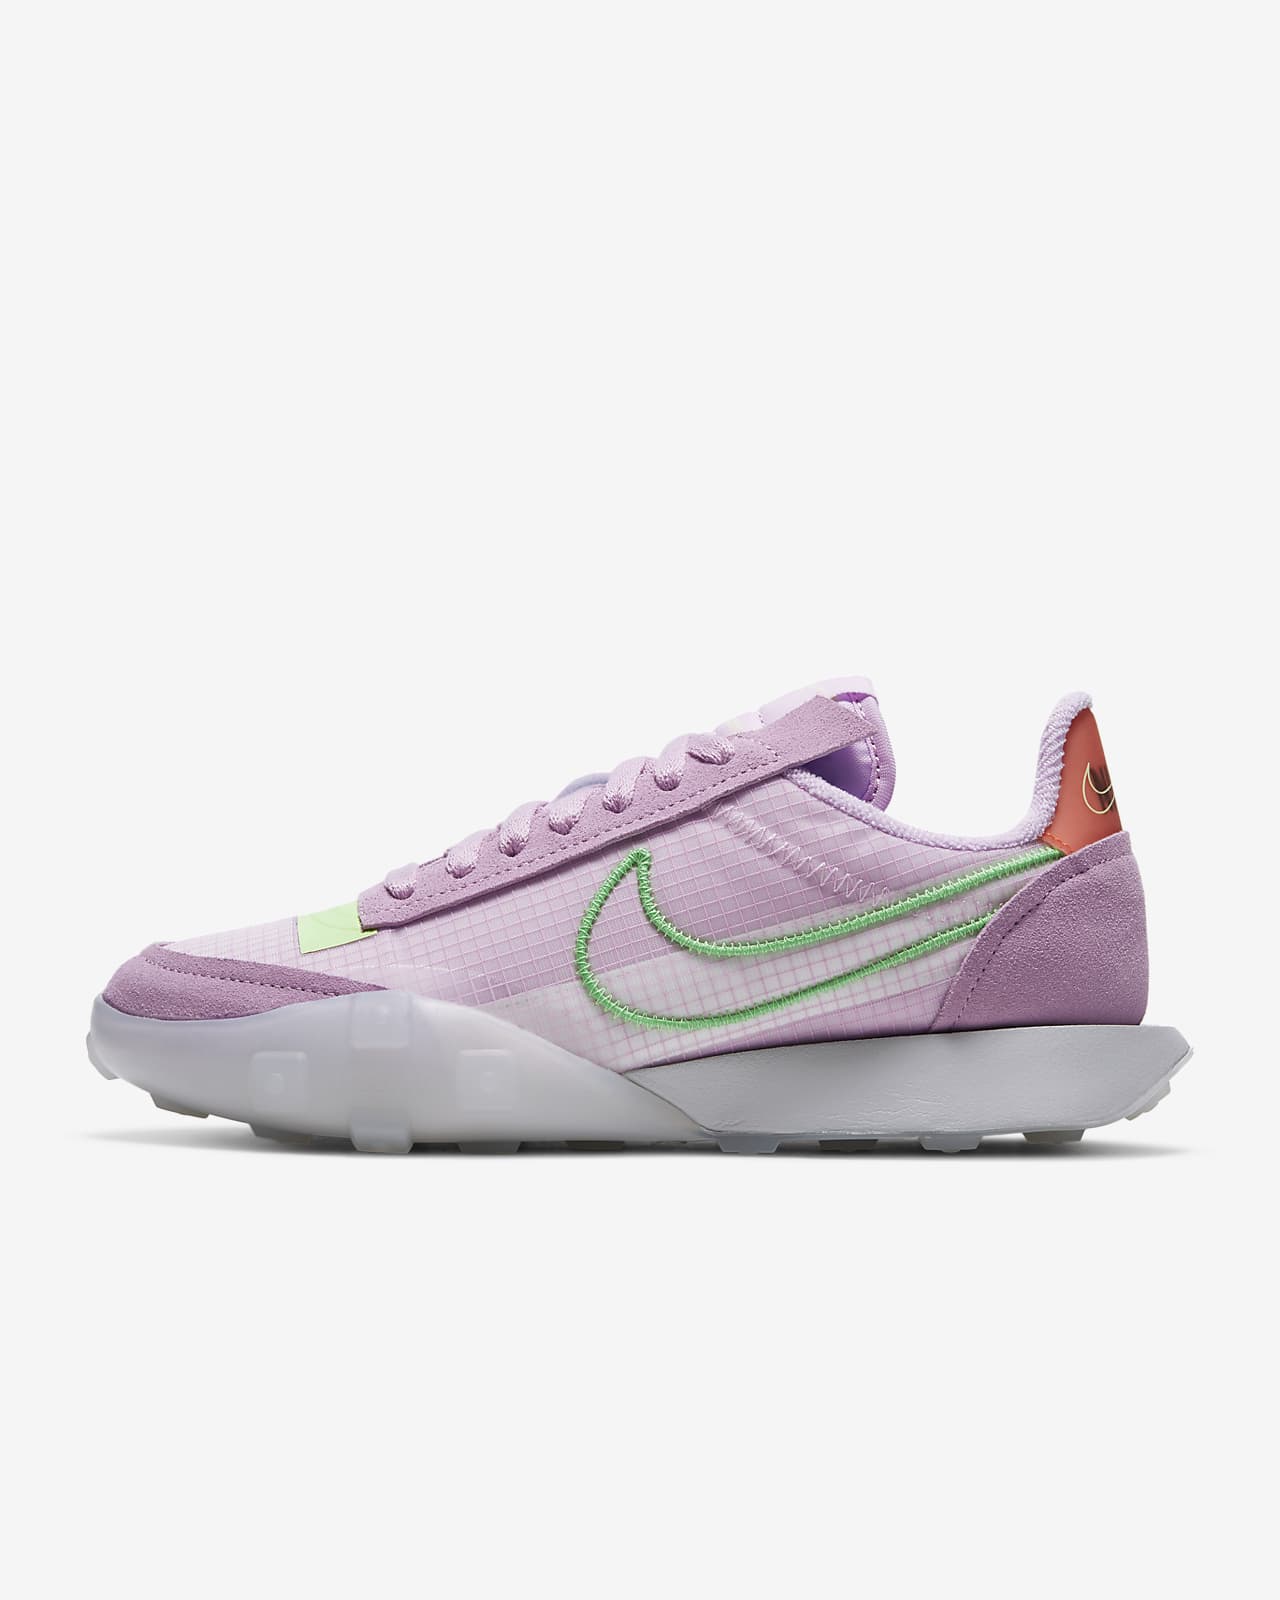 W Nike Waffle Racer 2X ‘Arctic Pink / Poison Green’ .97 Free Shipping